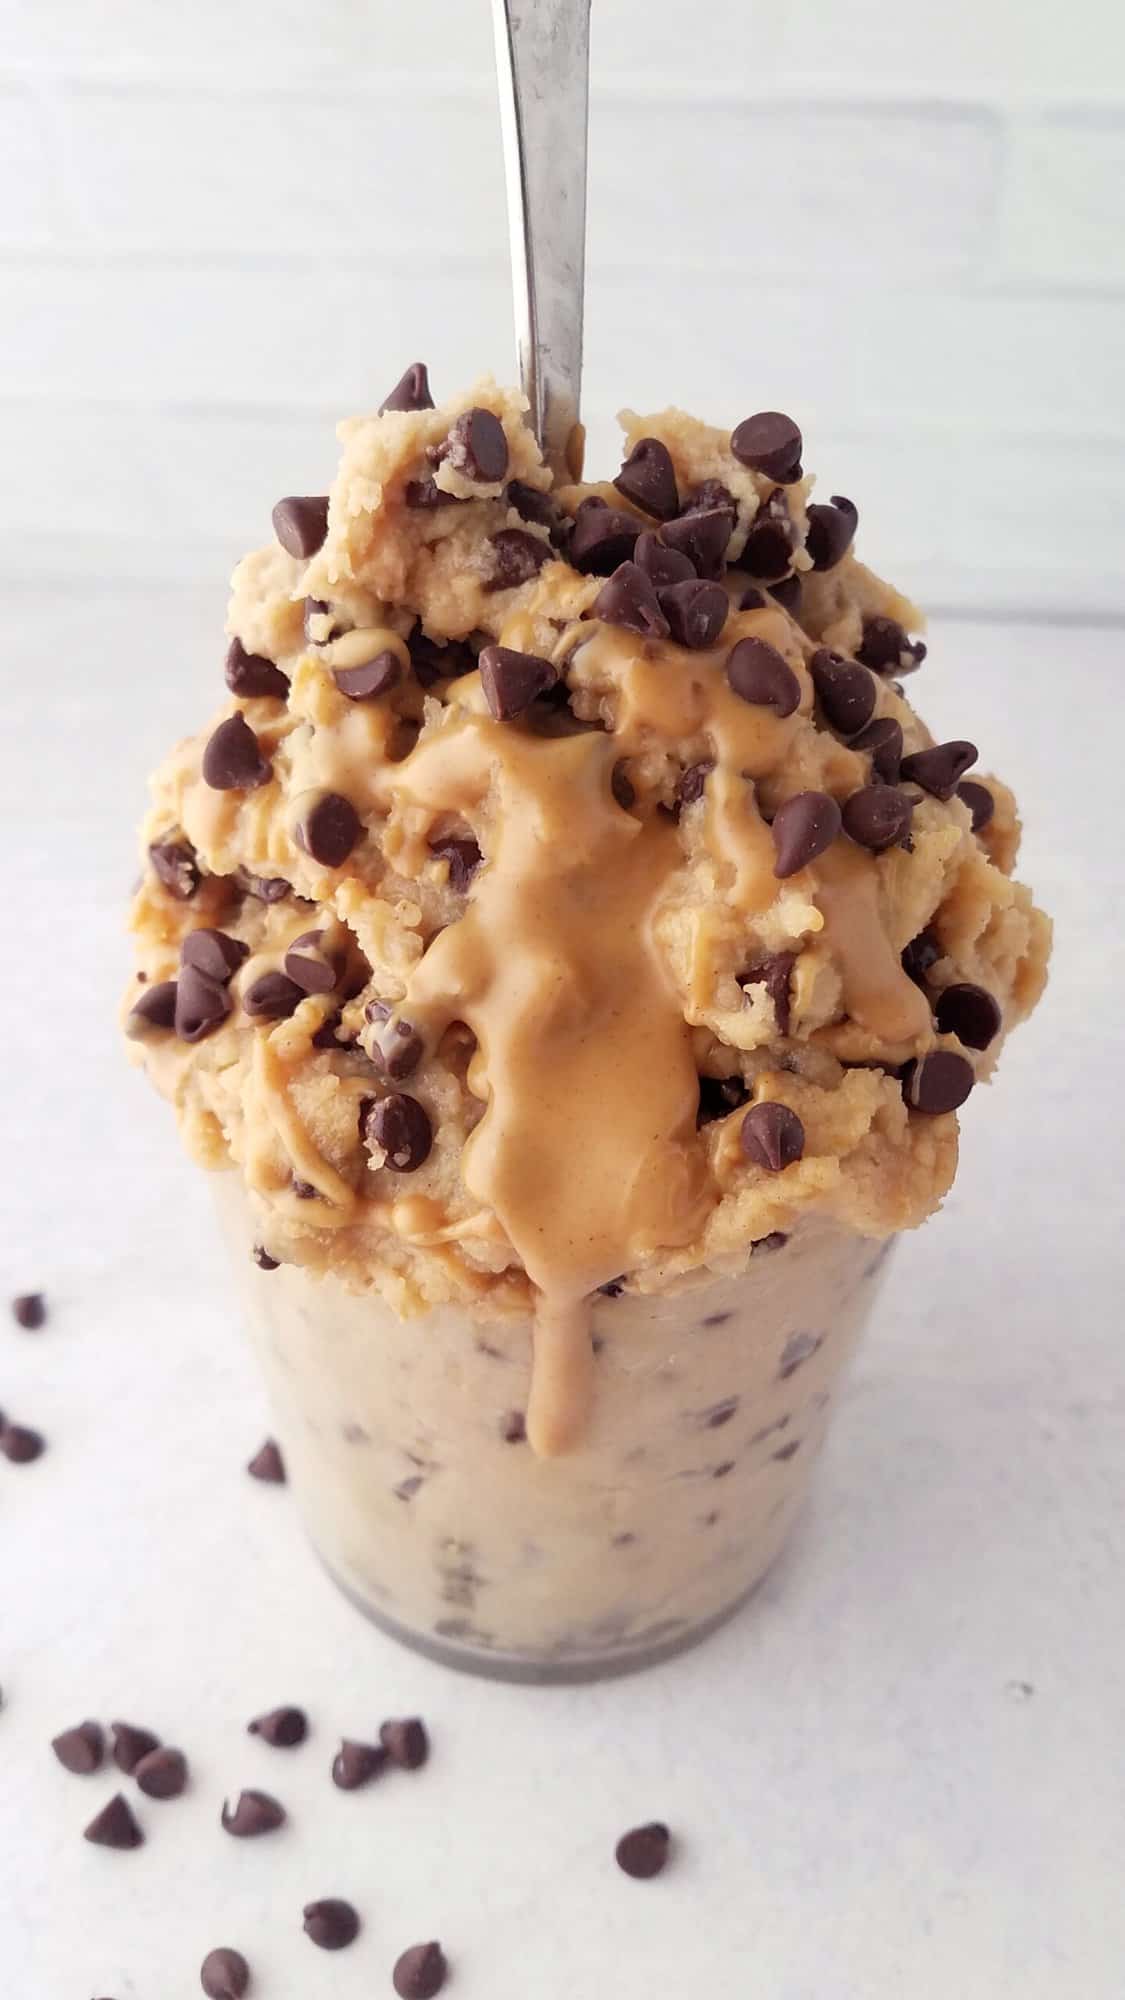 chocolate chip edible cookie dough with peanut butter drizzle in a glass.